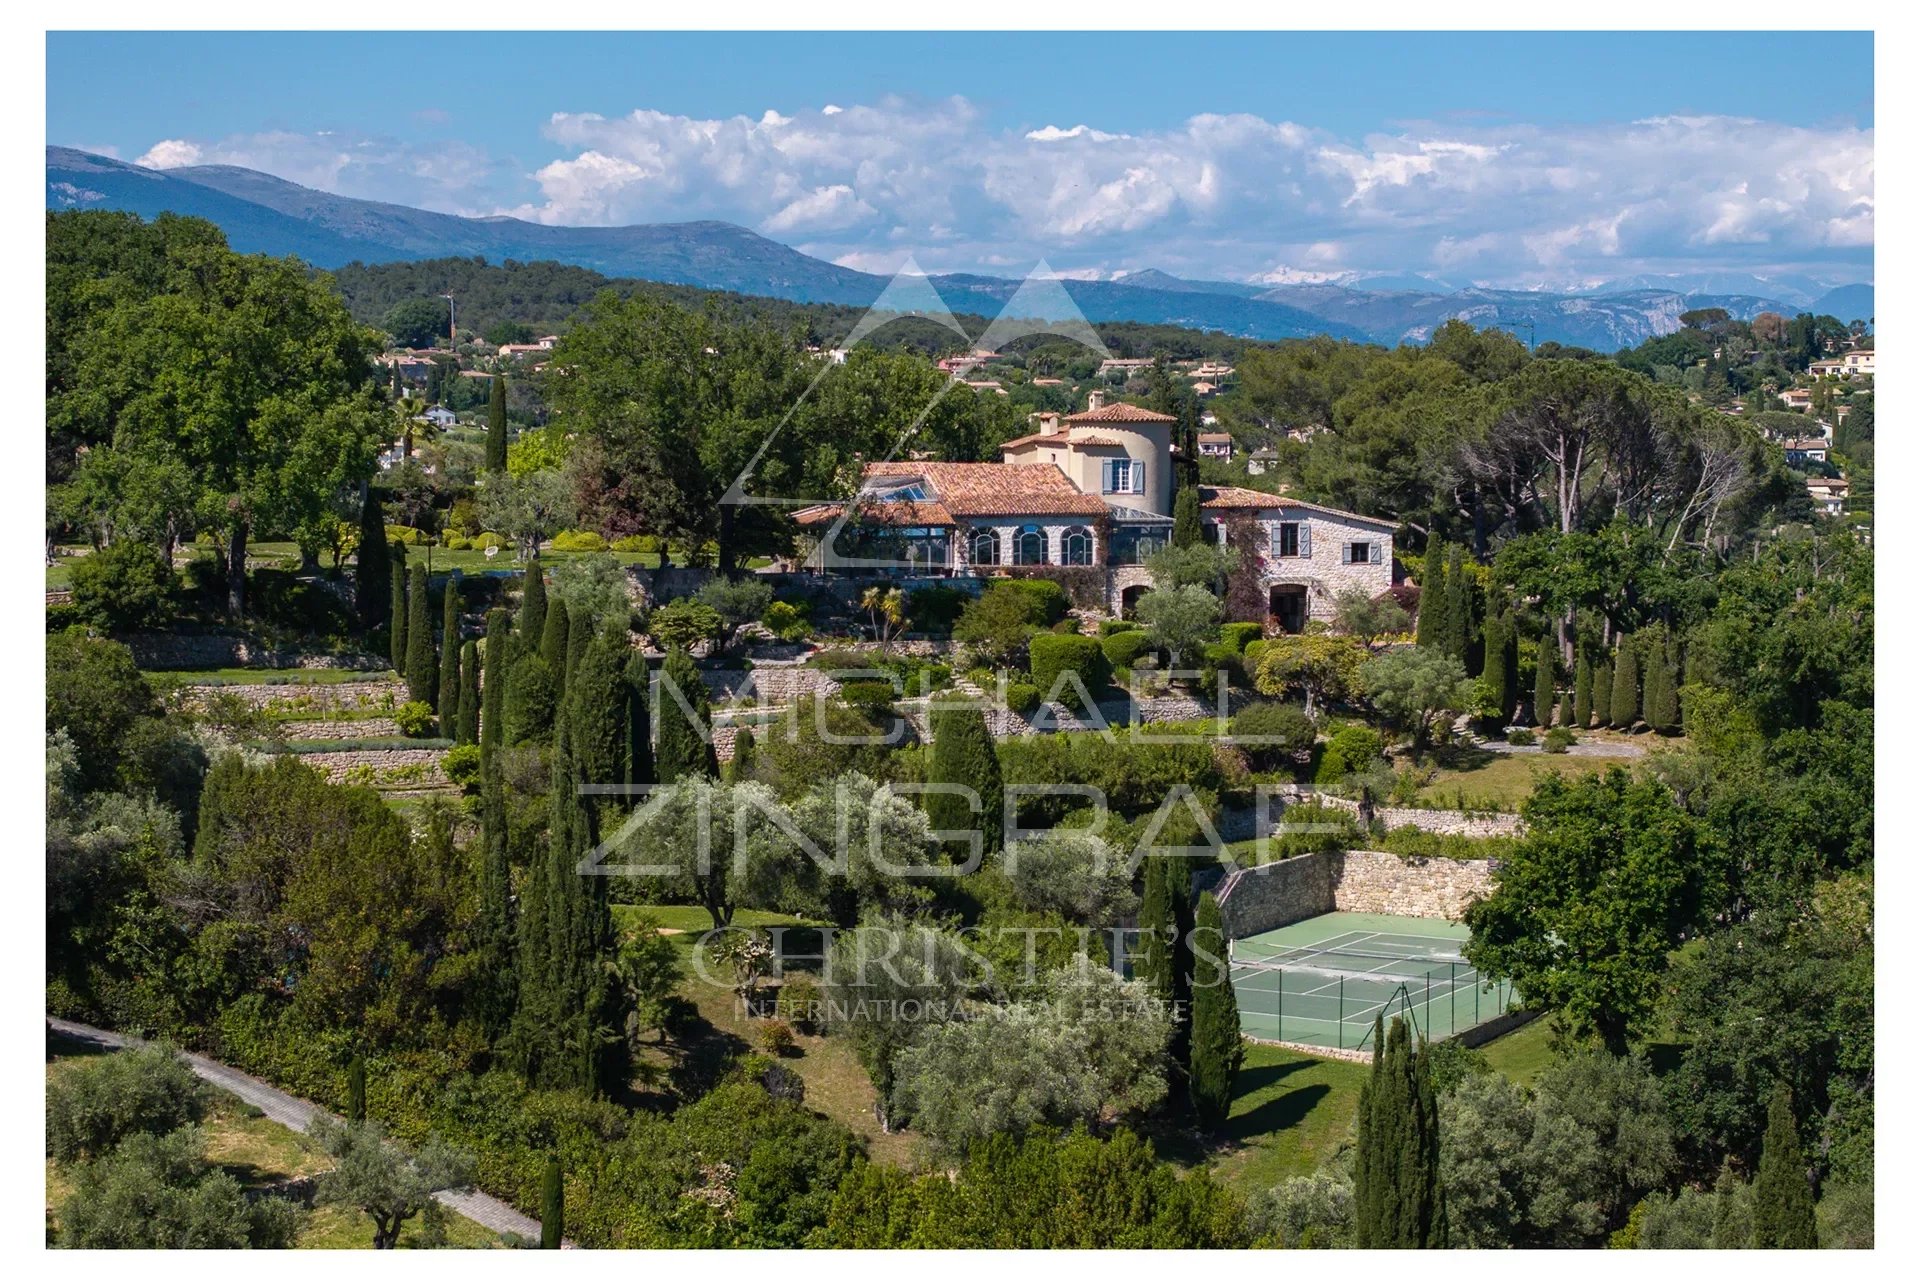 Mougins - Exceptional domain - Sea view